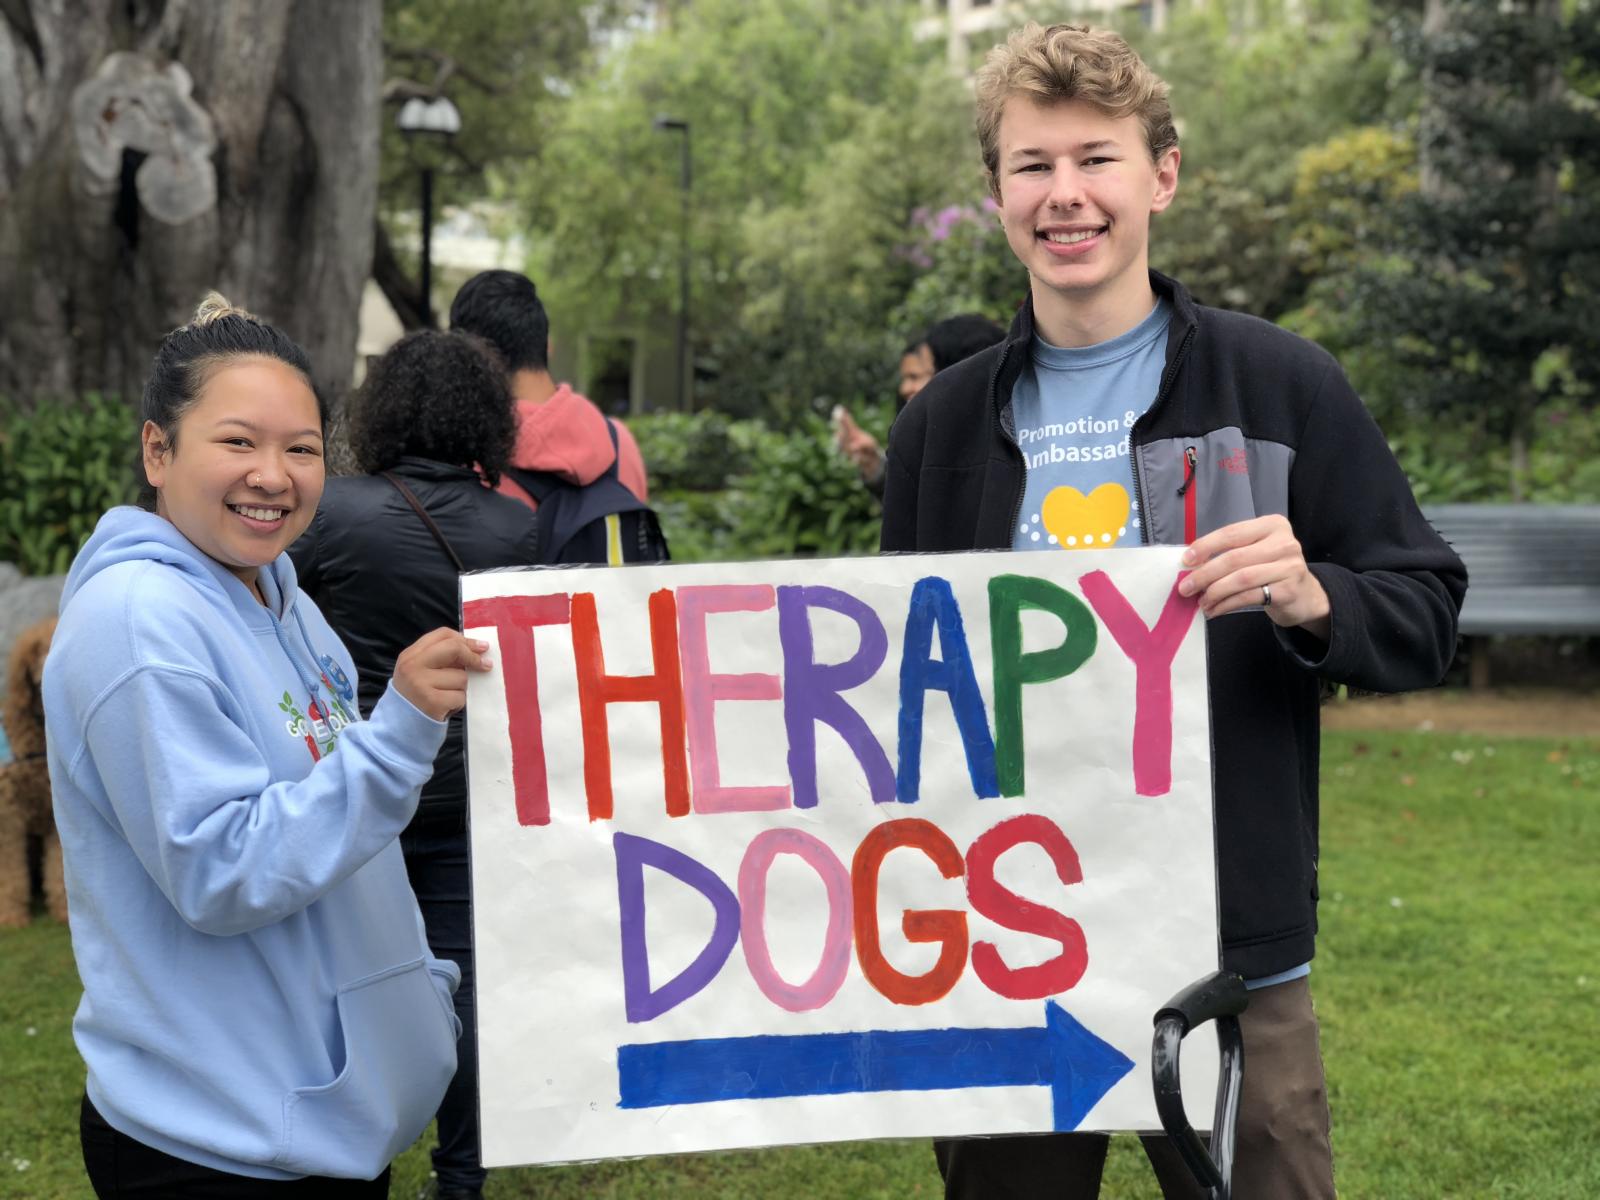 Two Students Holding a Therapy Dogs Poster